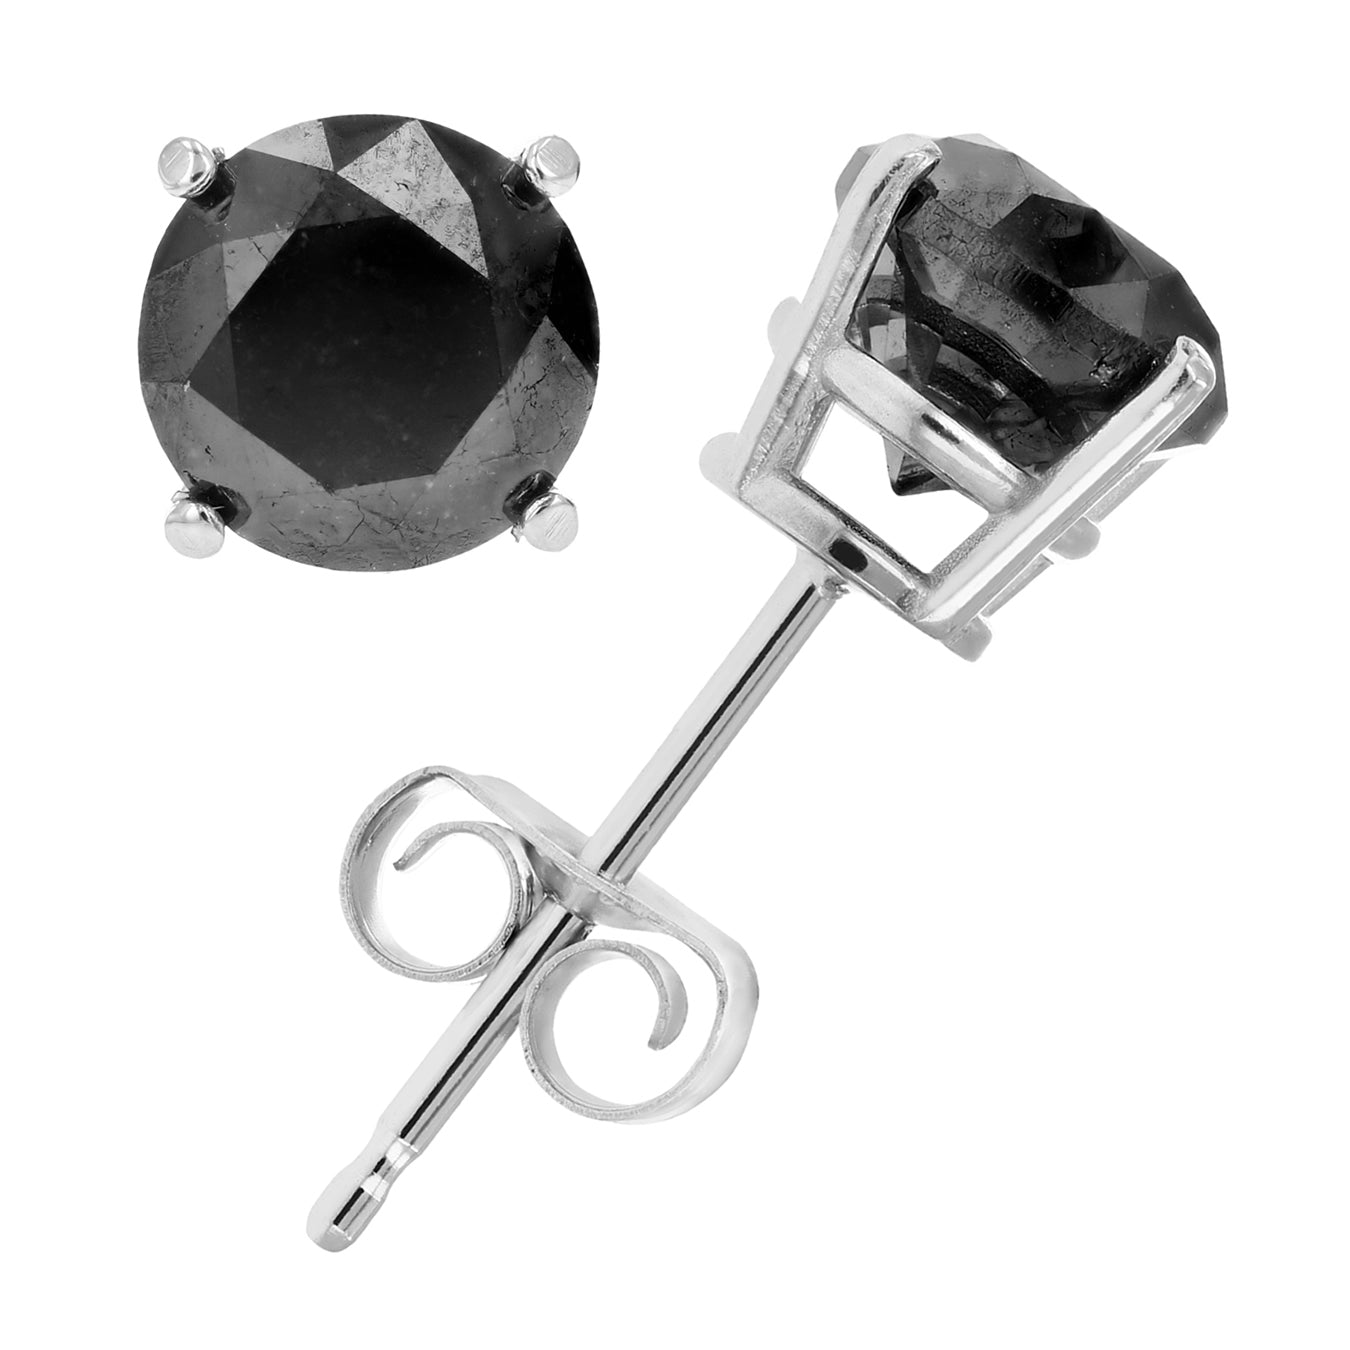 3 cttw Black Diamond Stud Earrings .925 Sterling Silver Round with Push Backs